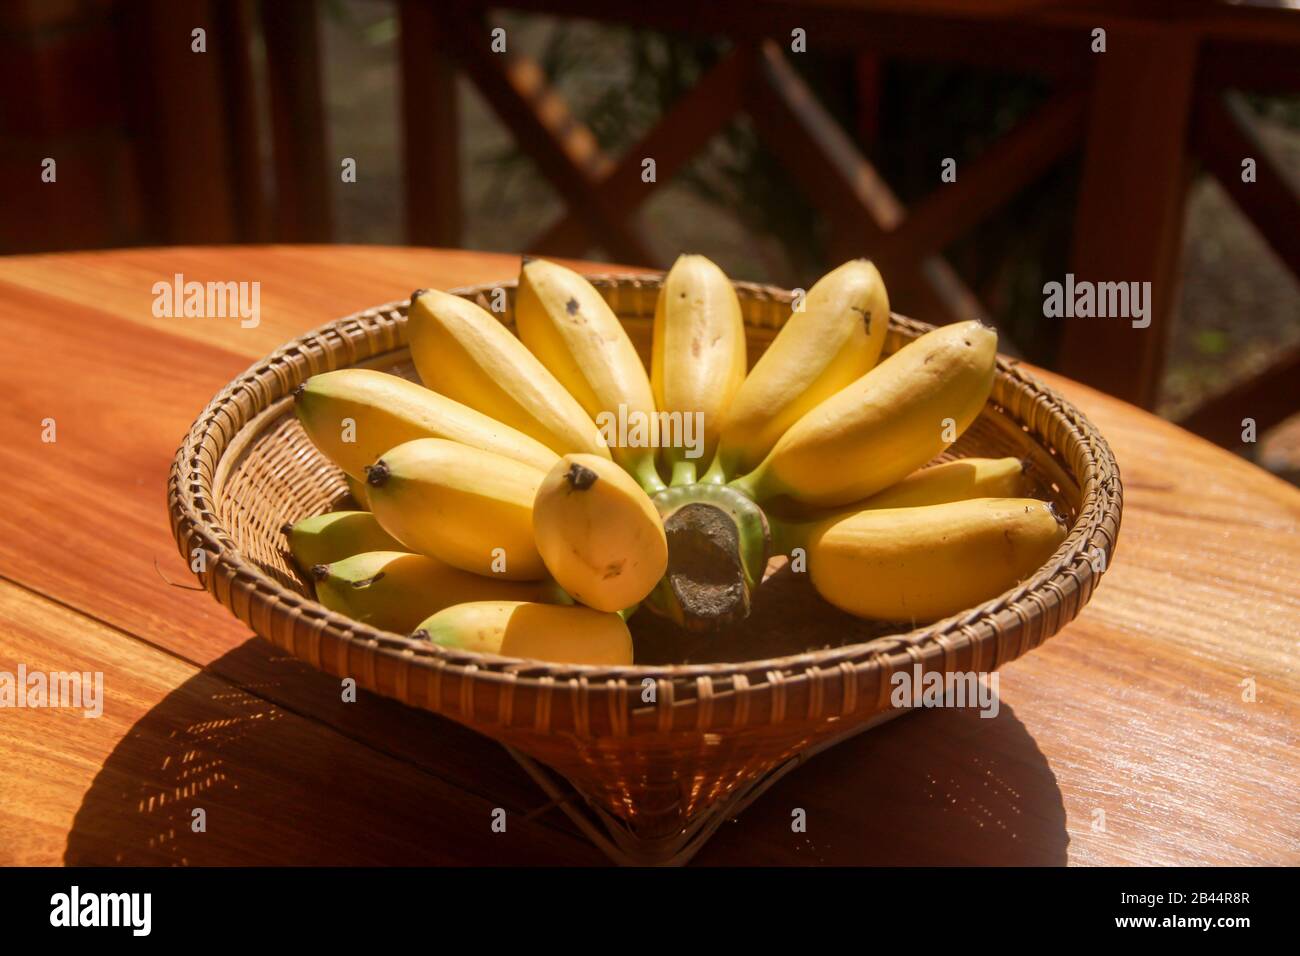 golden bananas or Lady Finger banana in weave basket on wood table. healthy fruit food. Stock Photo